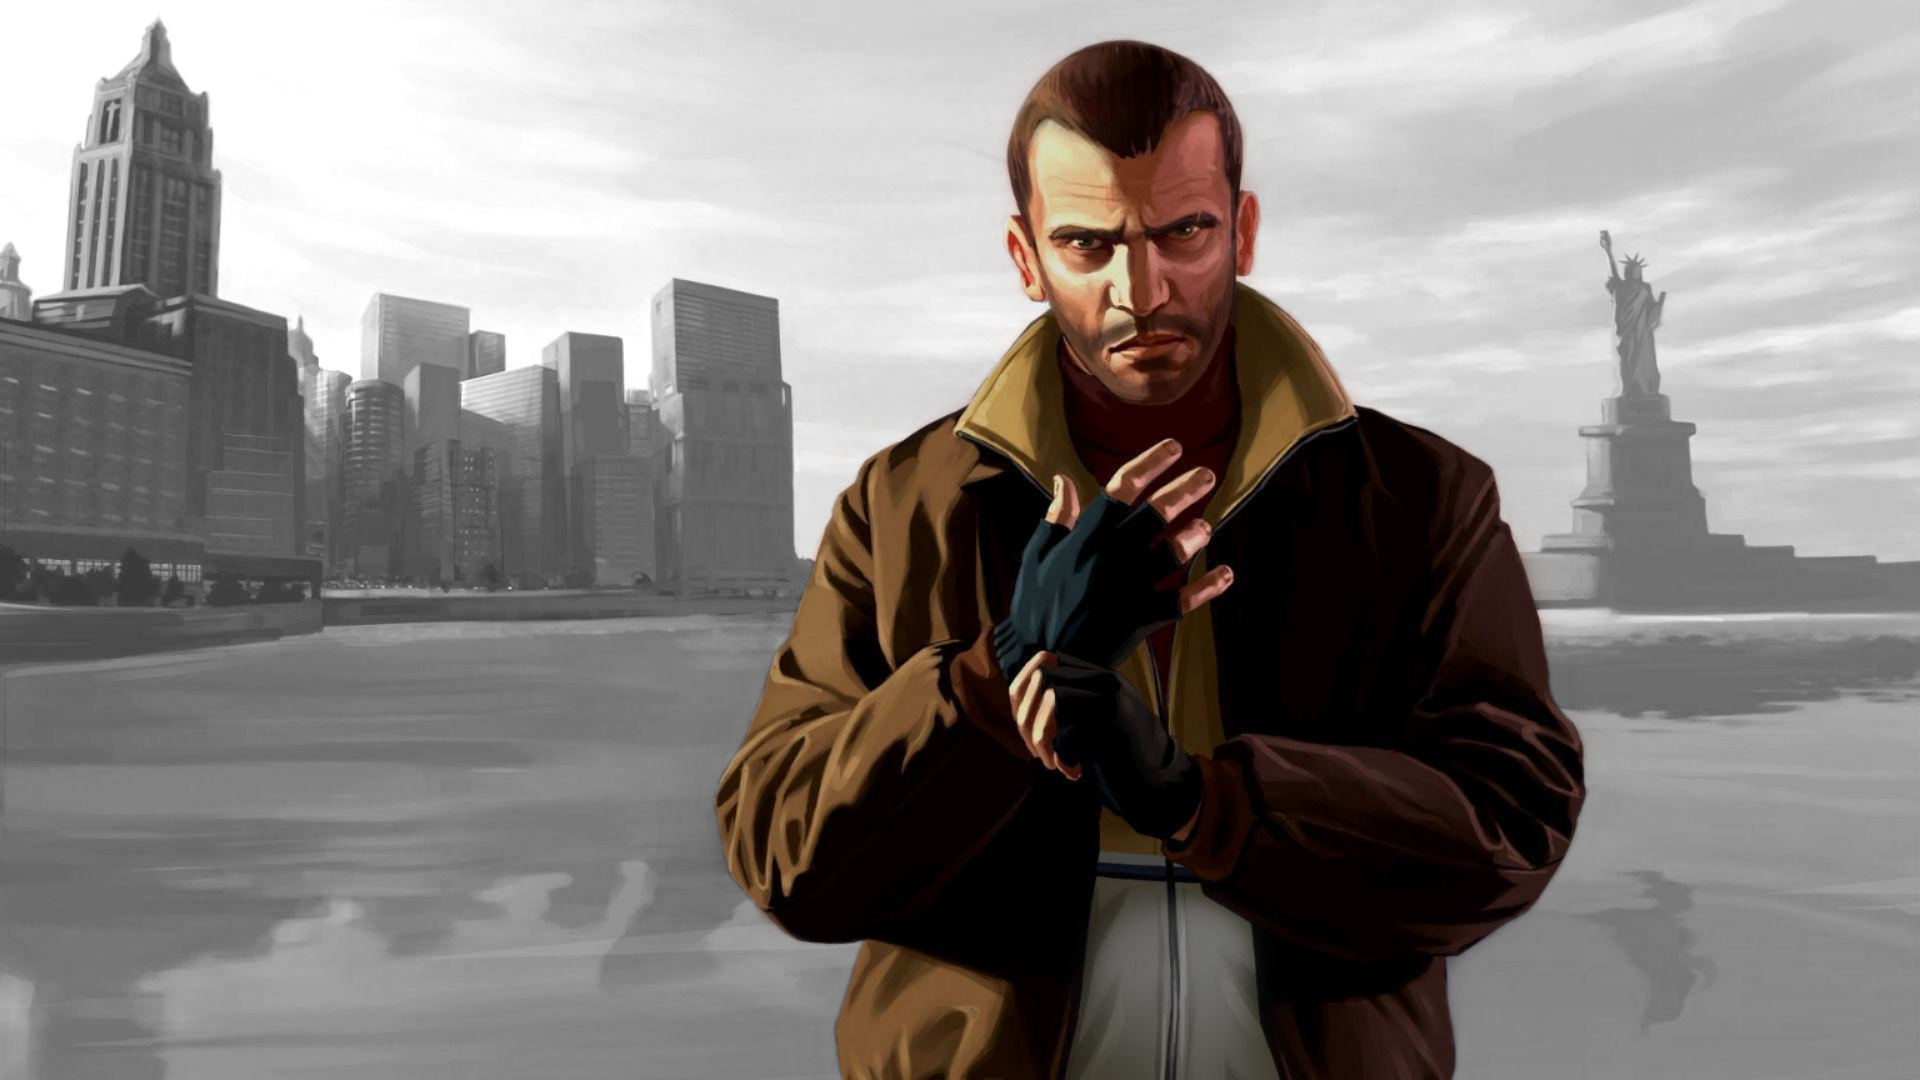 Grand Theft Auto IV Wallpaper, HD Games 4K Wallpapers, Images and